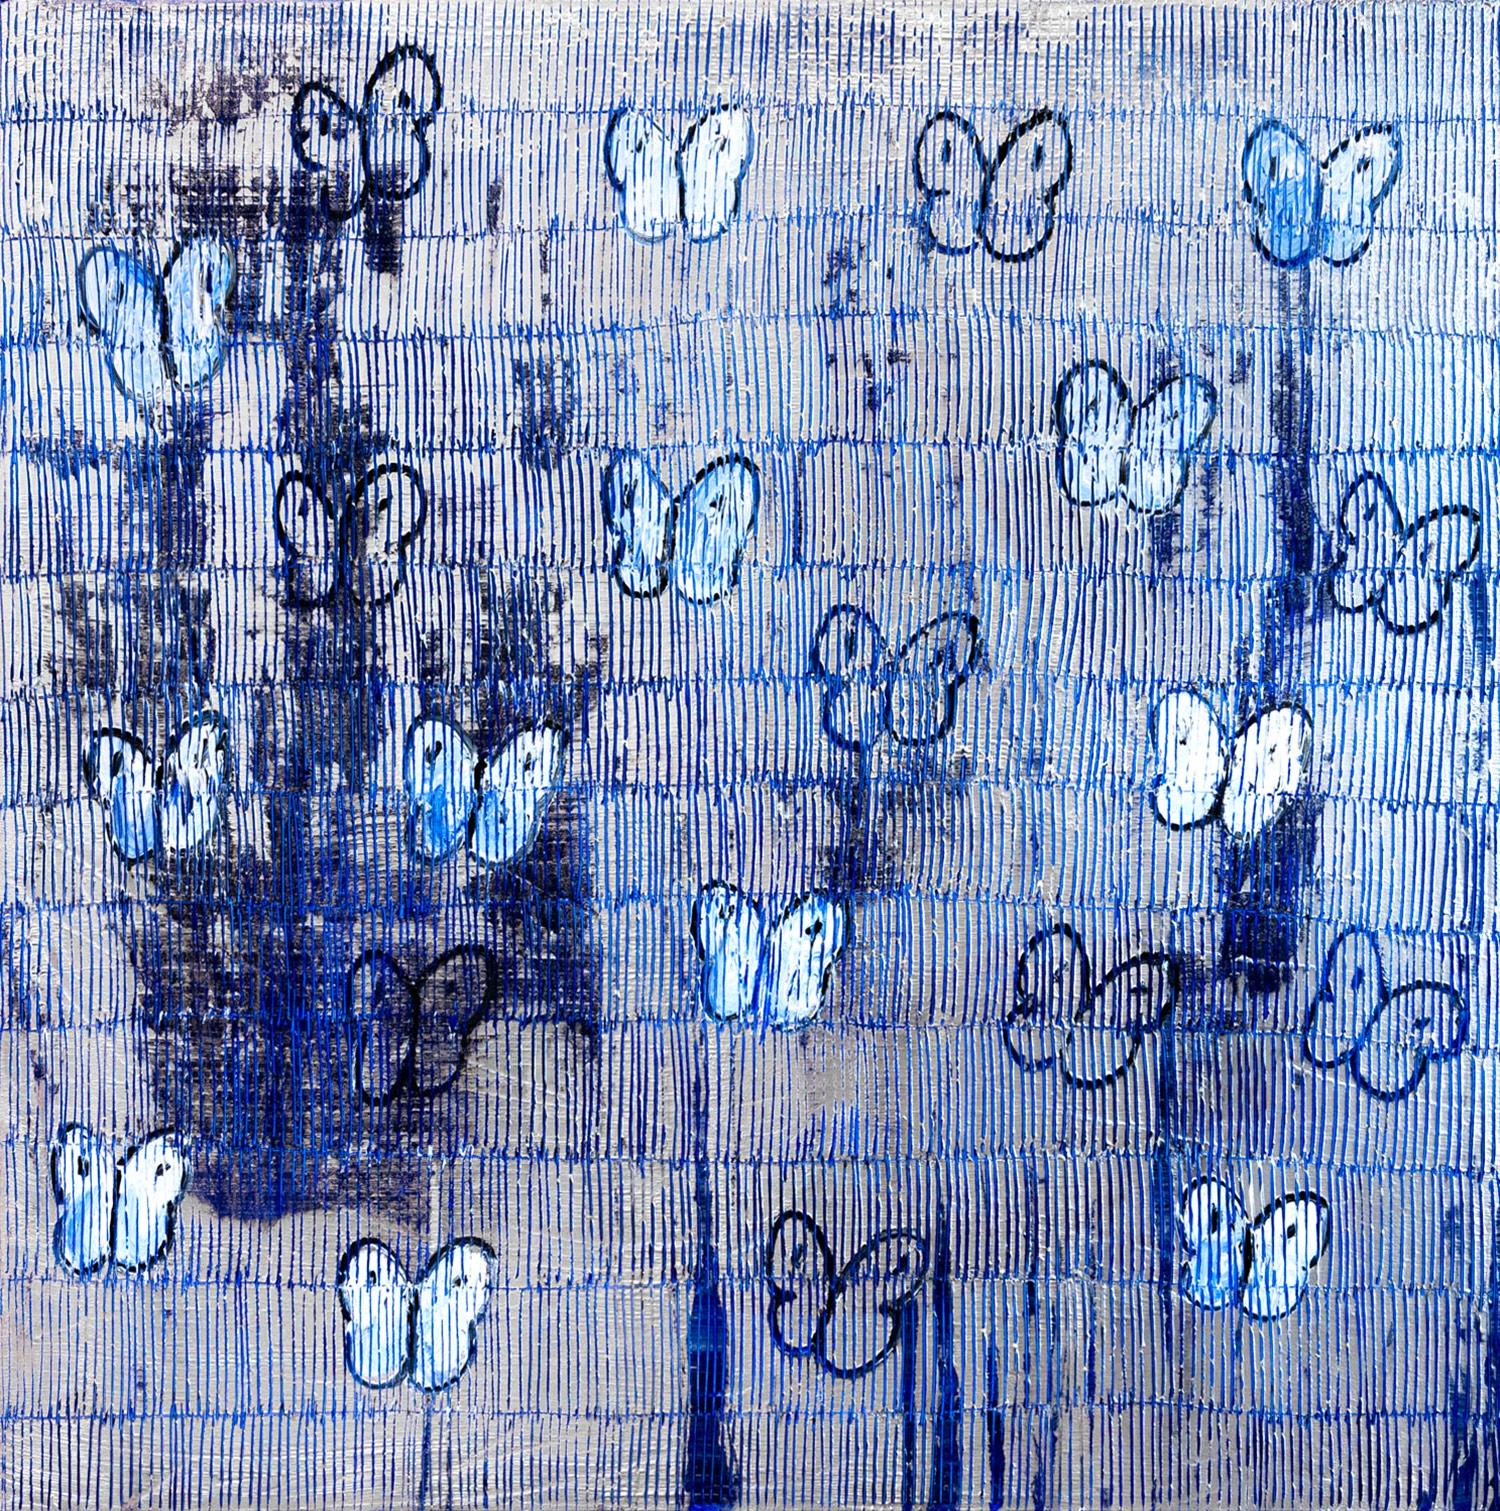 Hunt Slonem Abstract Painting - "Blue Tsunami Ascension" White & Blue Butterflies w Silver Oil Painting Canvas